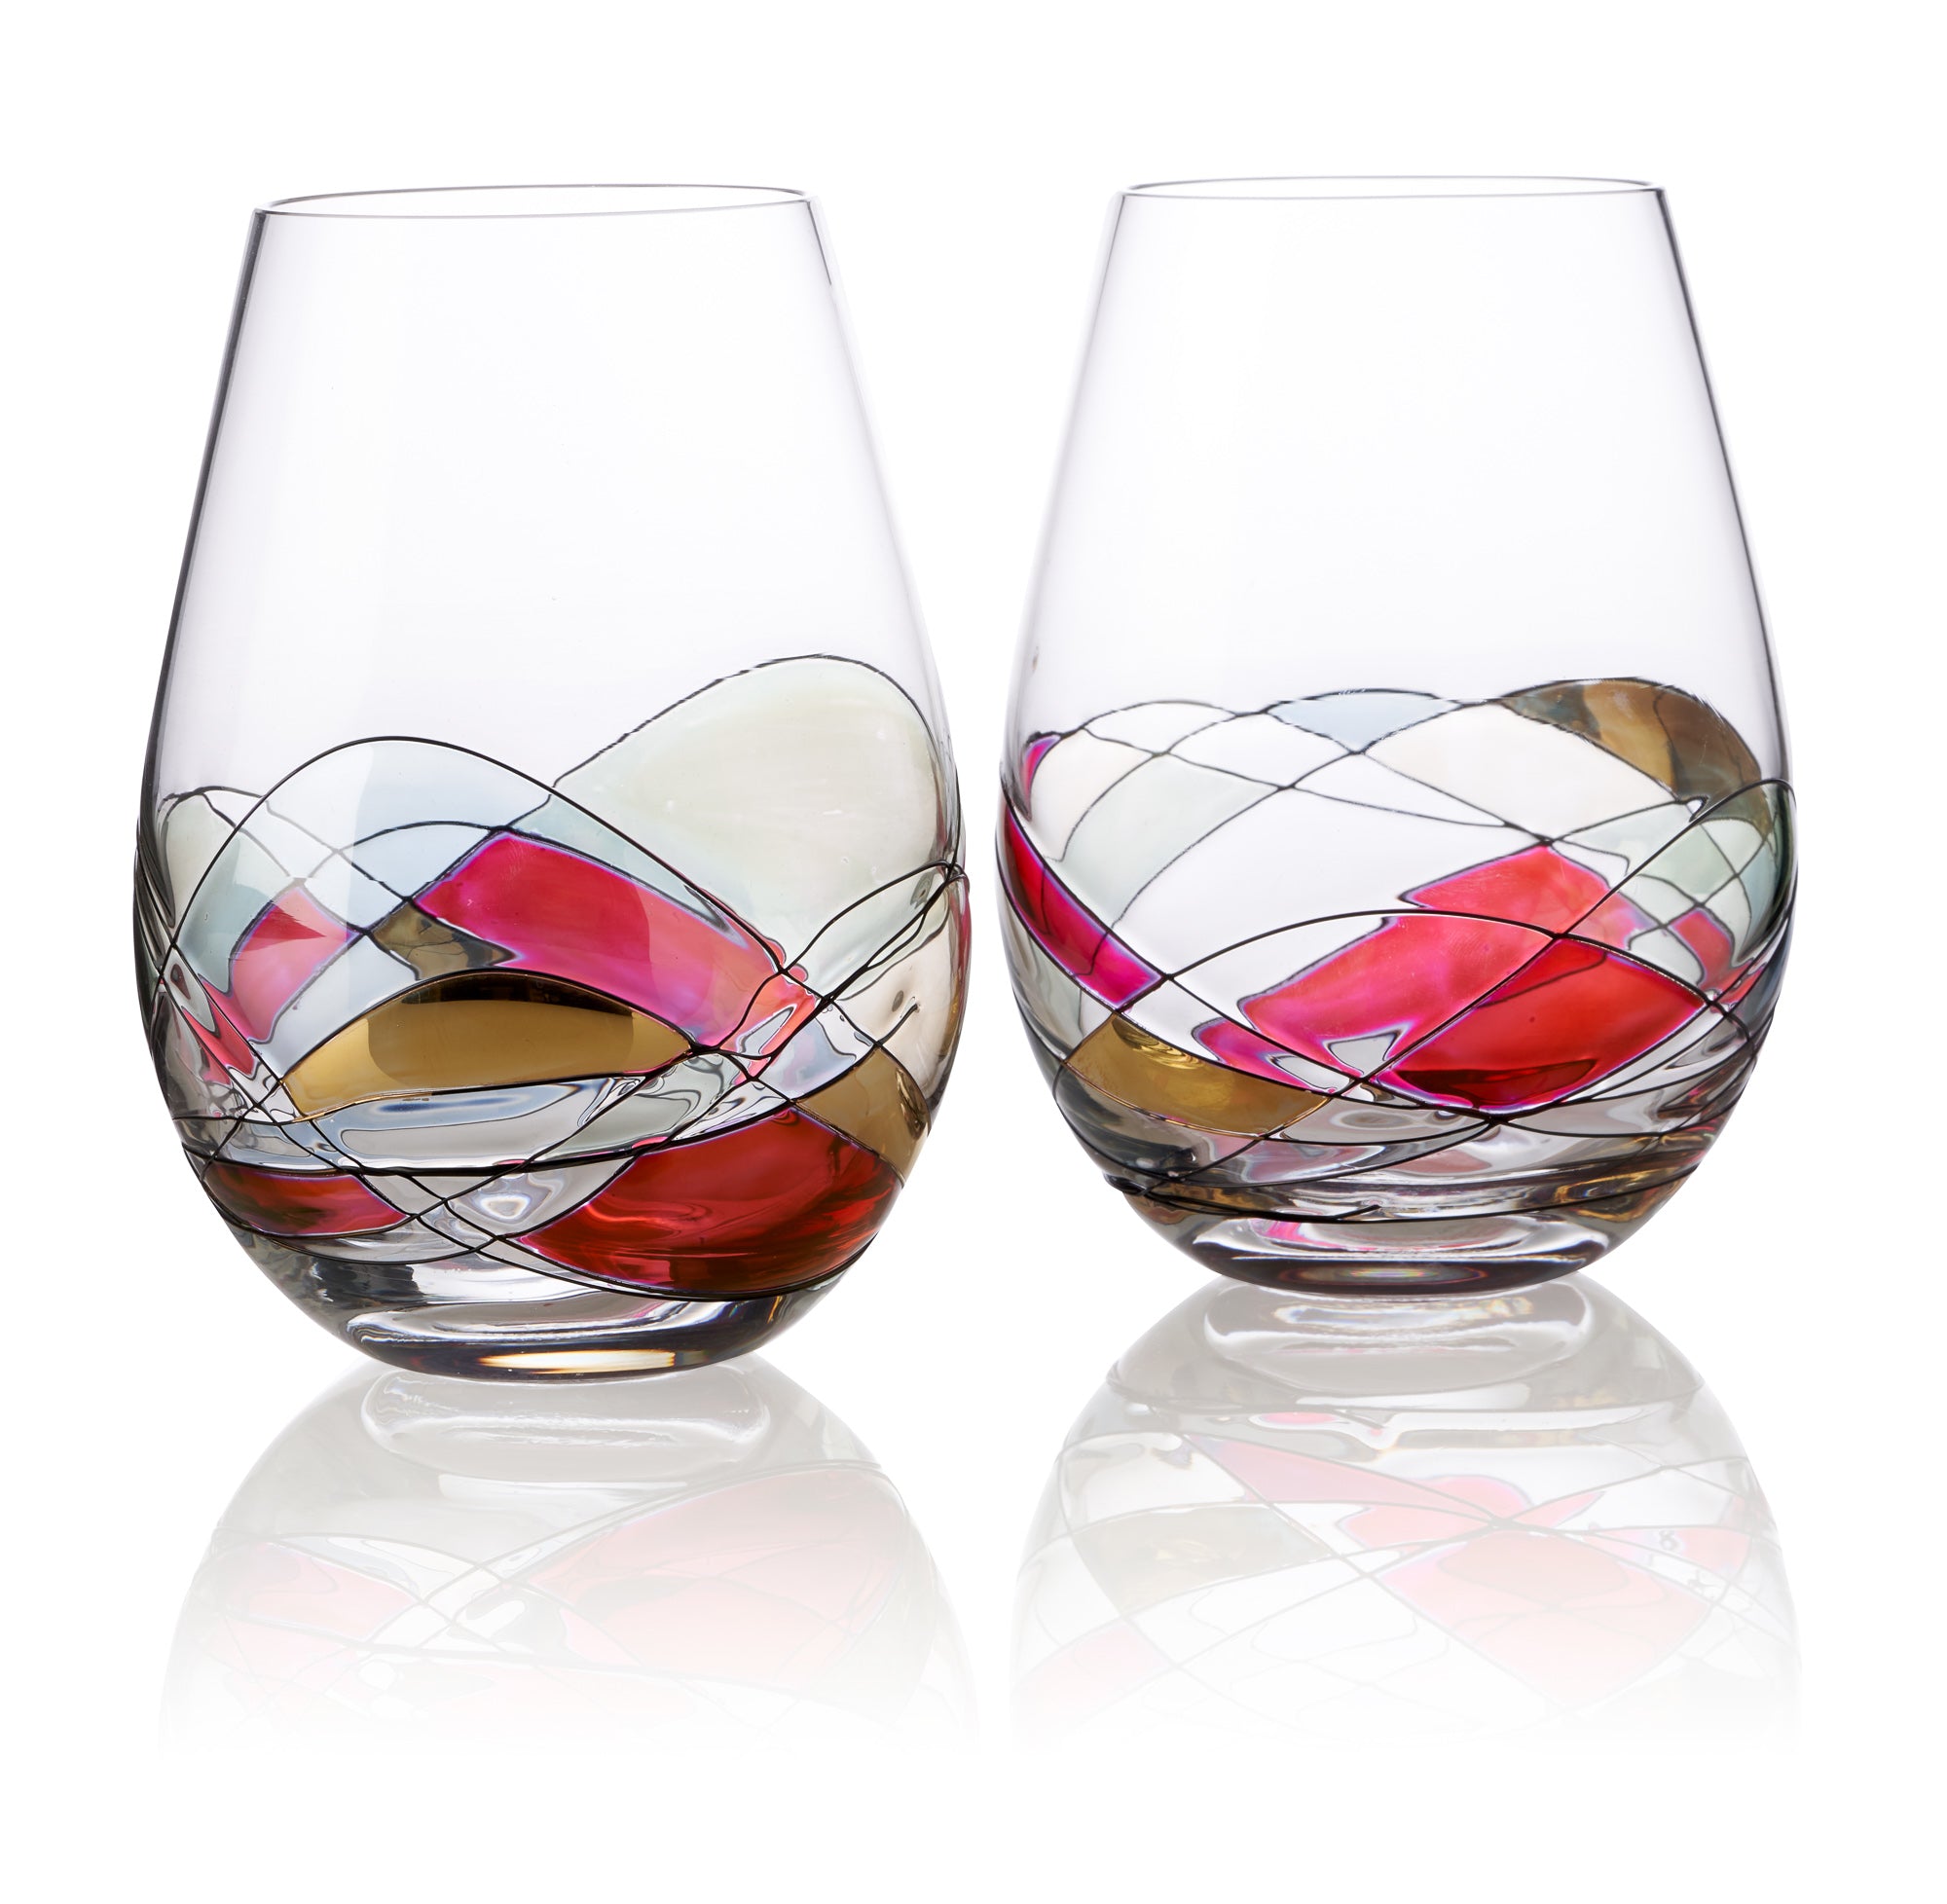 Bezrat Hand Painted Wine Glasses Set Of 2, Gold 28 Oz. Large Glass